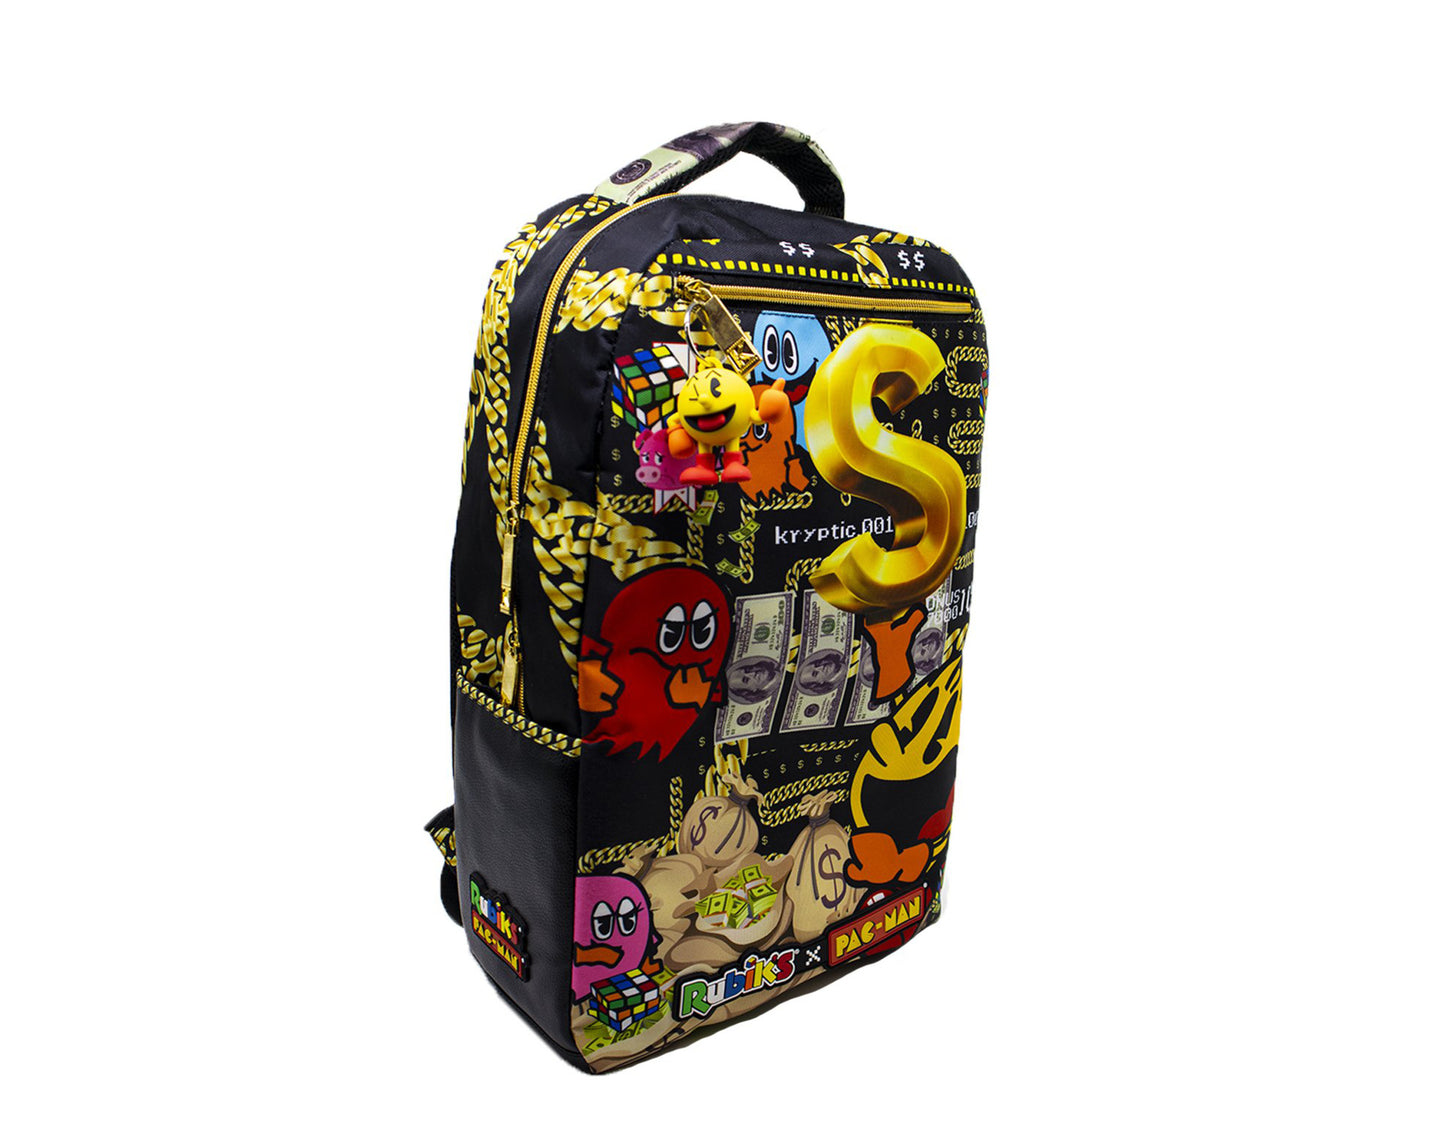 DeKryptic x Rubik's x Pac-Man - Paper Chaser Augmented Reality Backpack